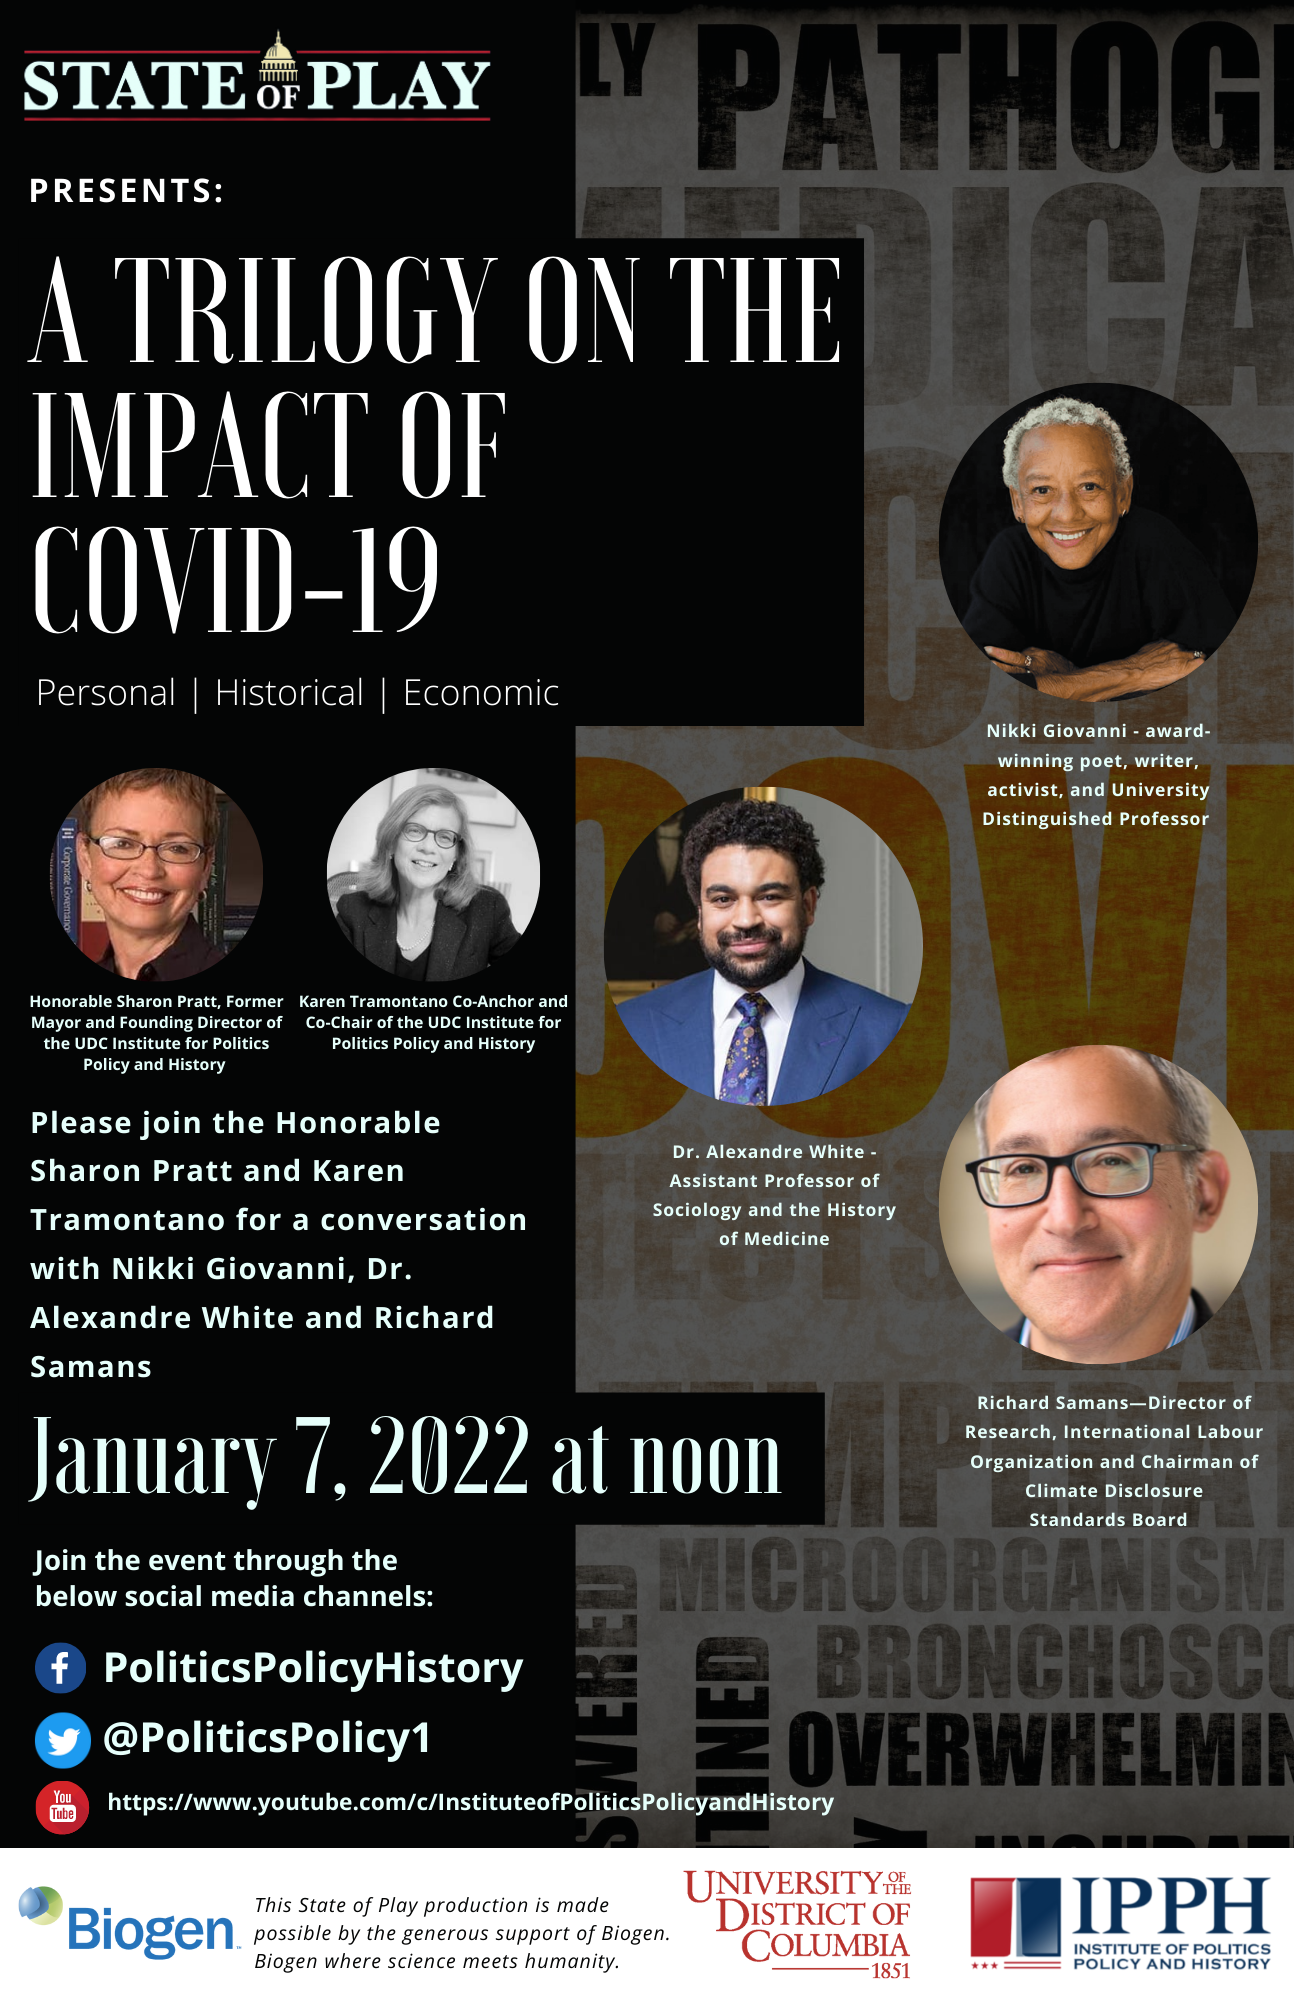 IPPH State of Play Presents: A Trilogy on the IMPACT of COVID-19 - January 7th at noon